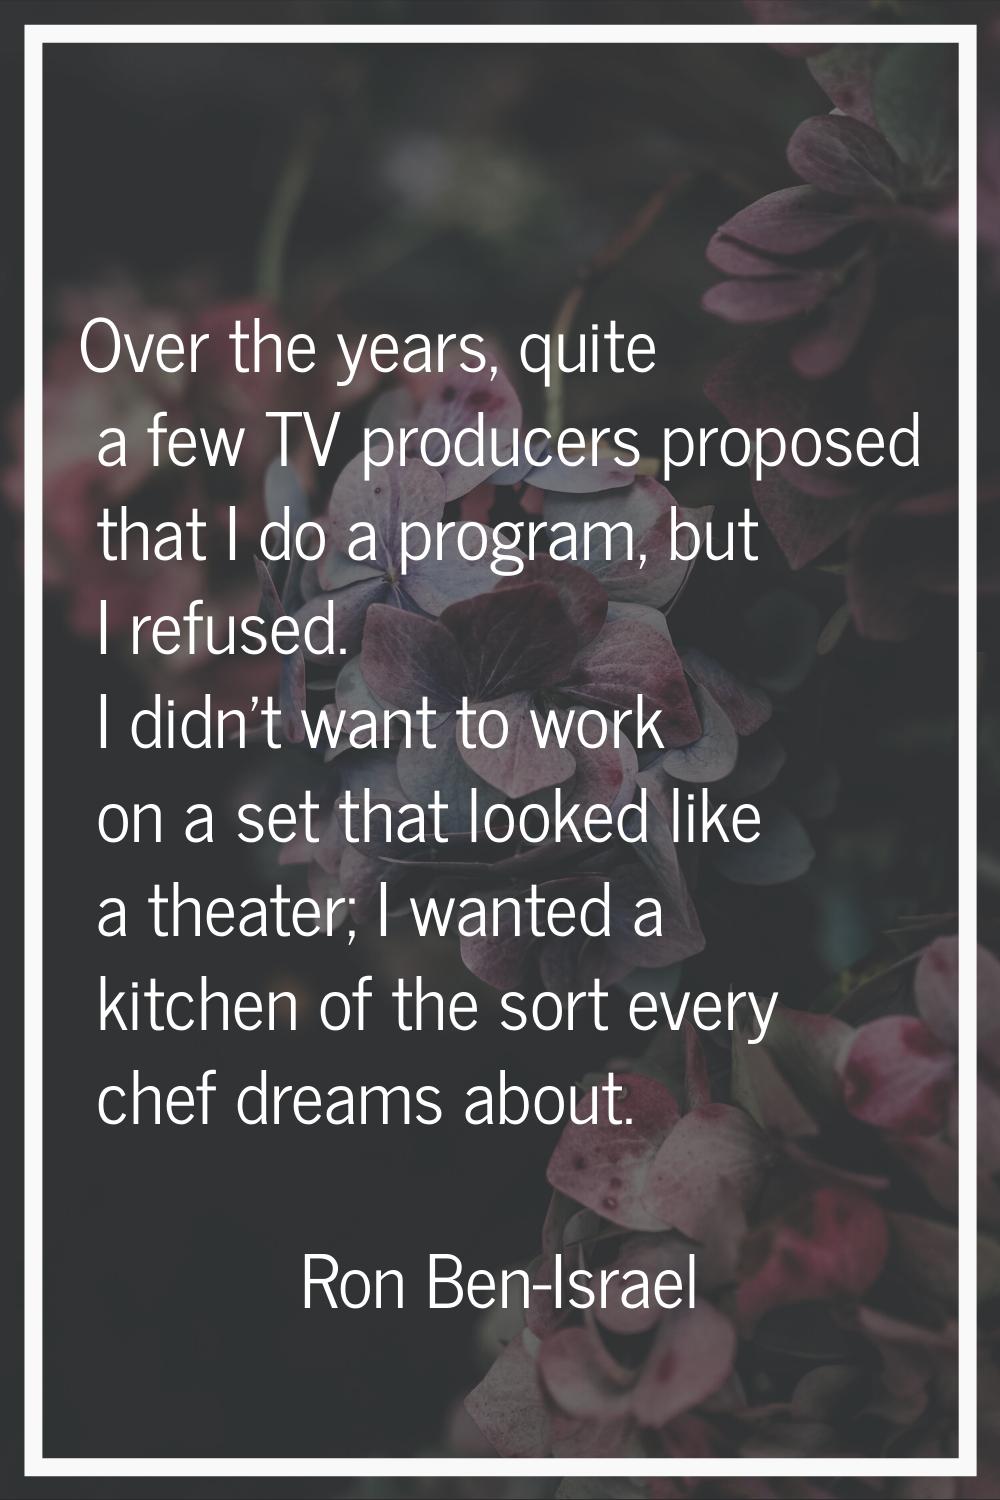 Over the years, quite a few TV producers proposed that I do a program, but I refused. I didn't want